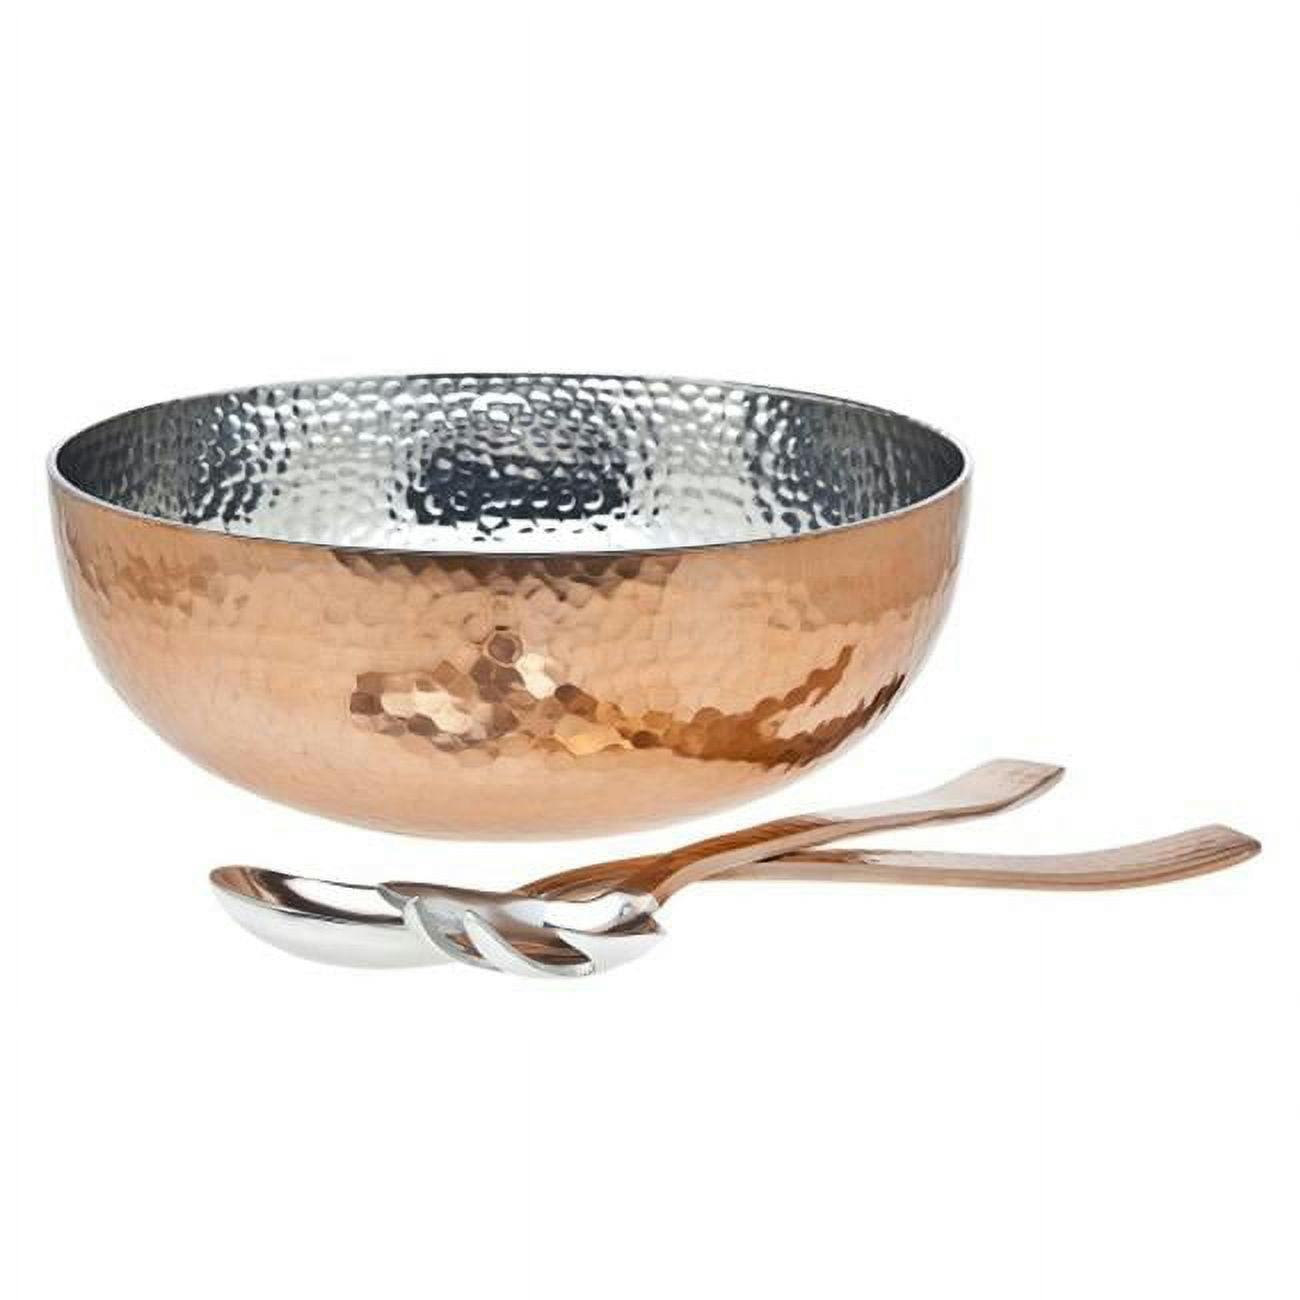 Classic Hammered Copper Salad Serving Bowl with Utensils